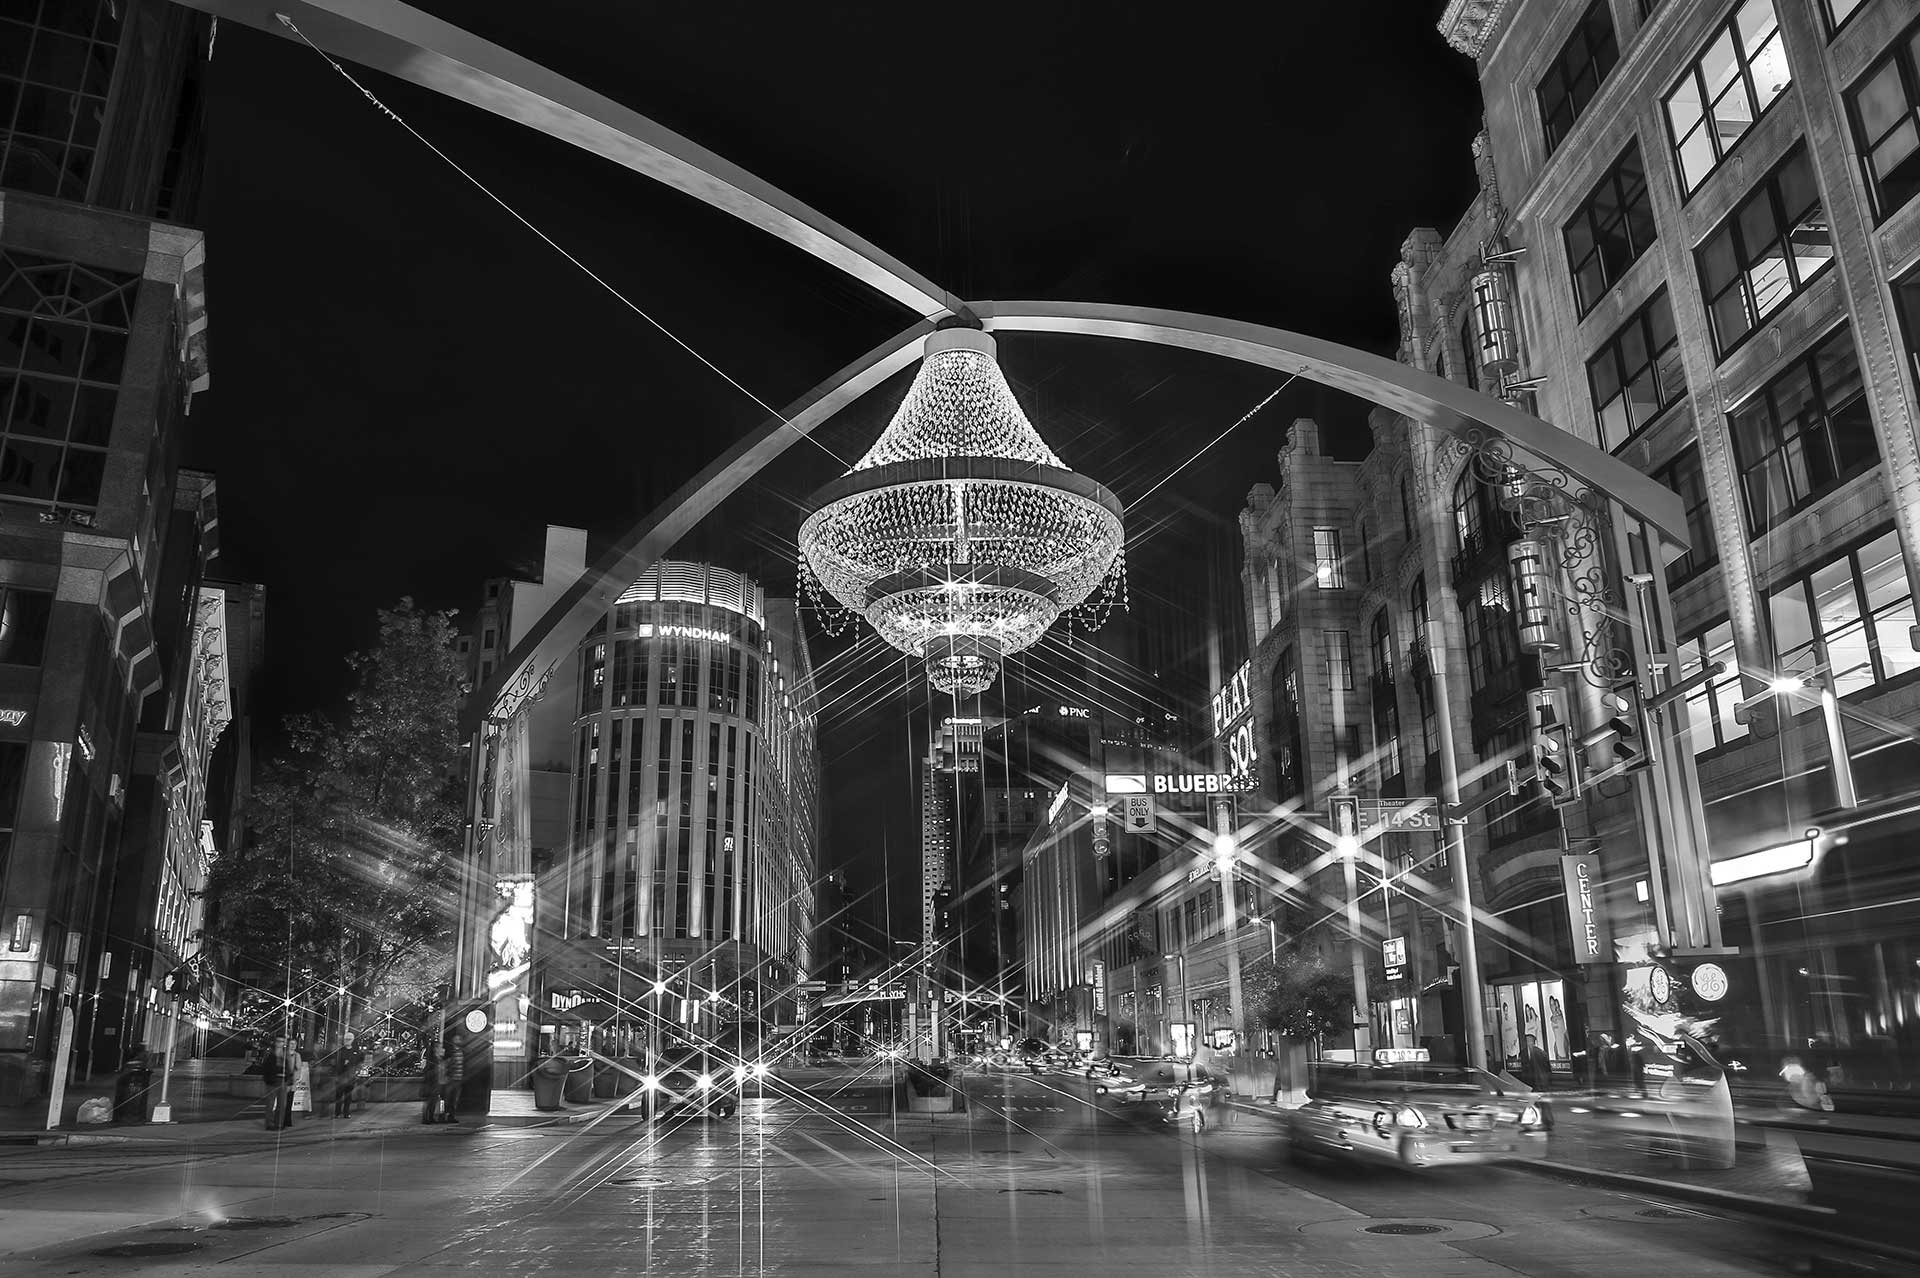 Playhouse Square in Cleveland, OH